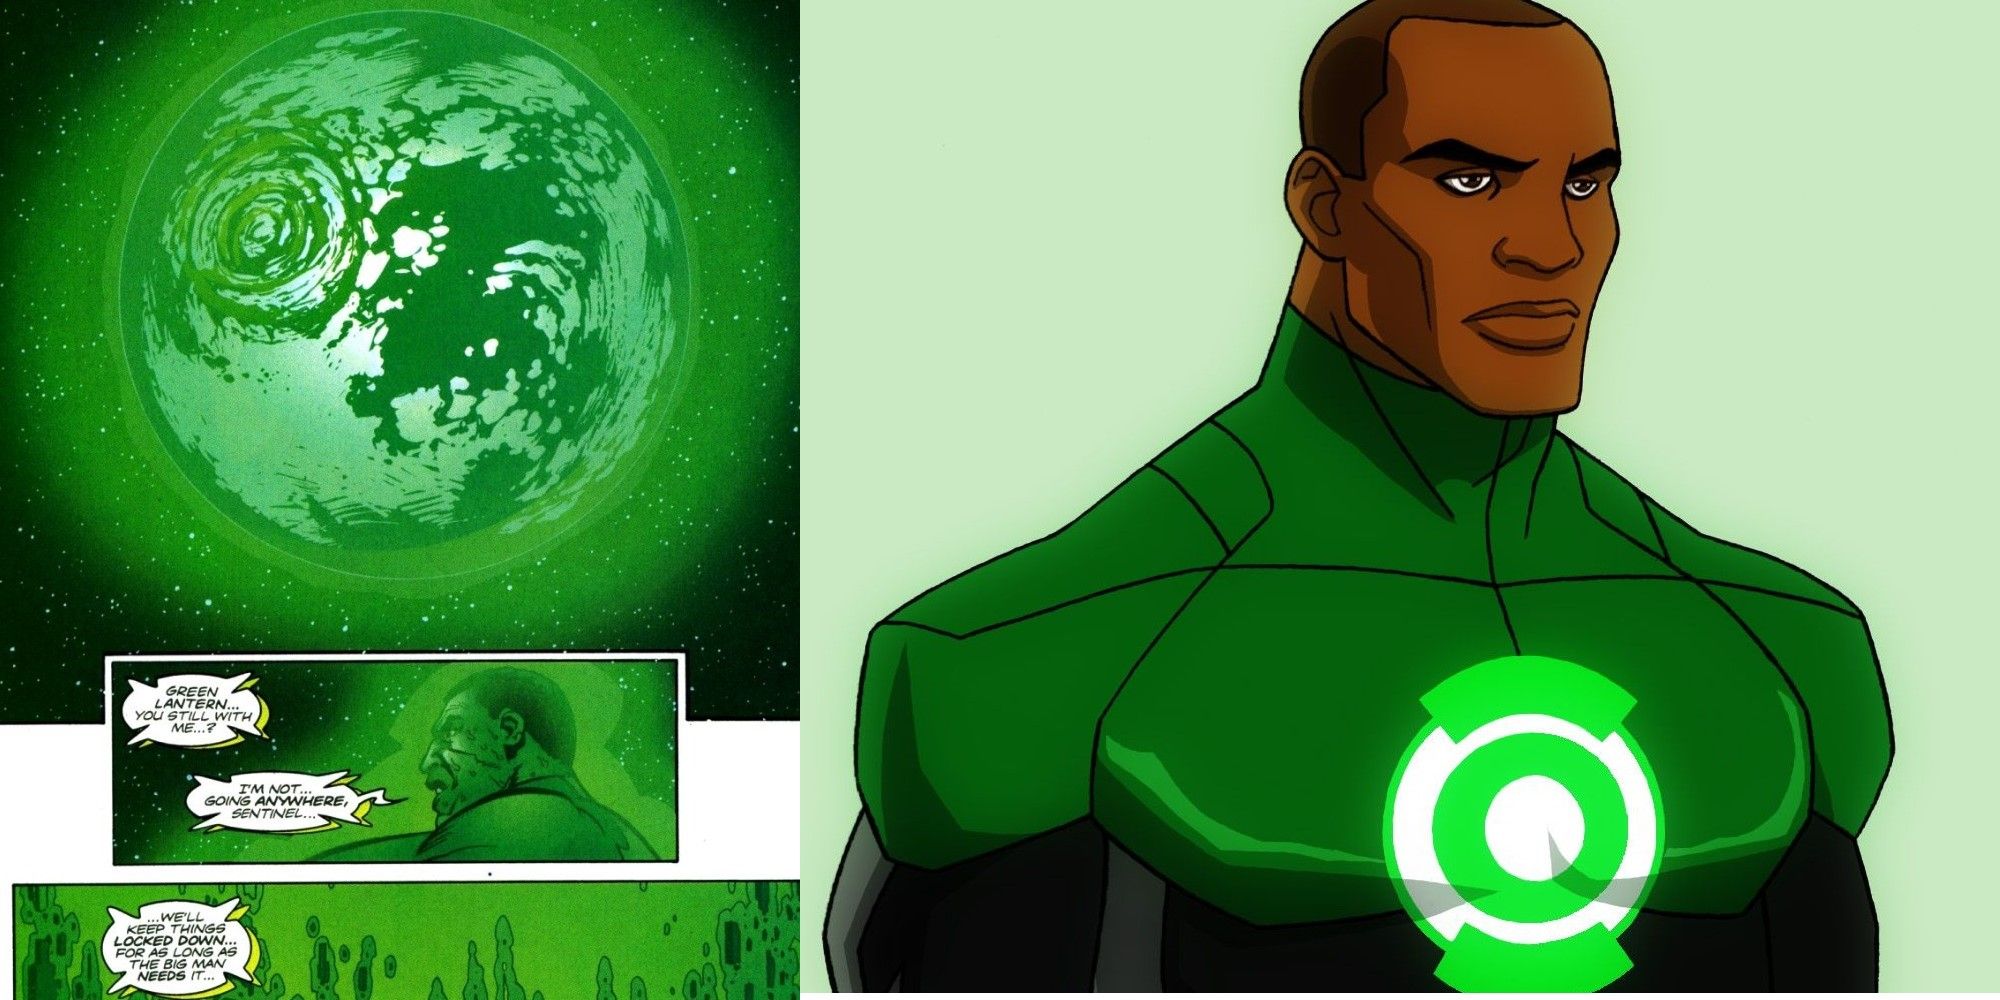 Green Lantern uses his power to keep the world from falling apart